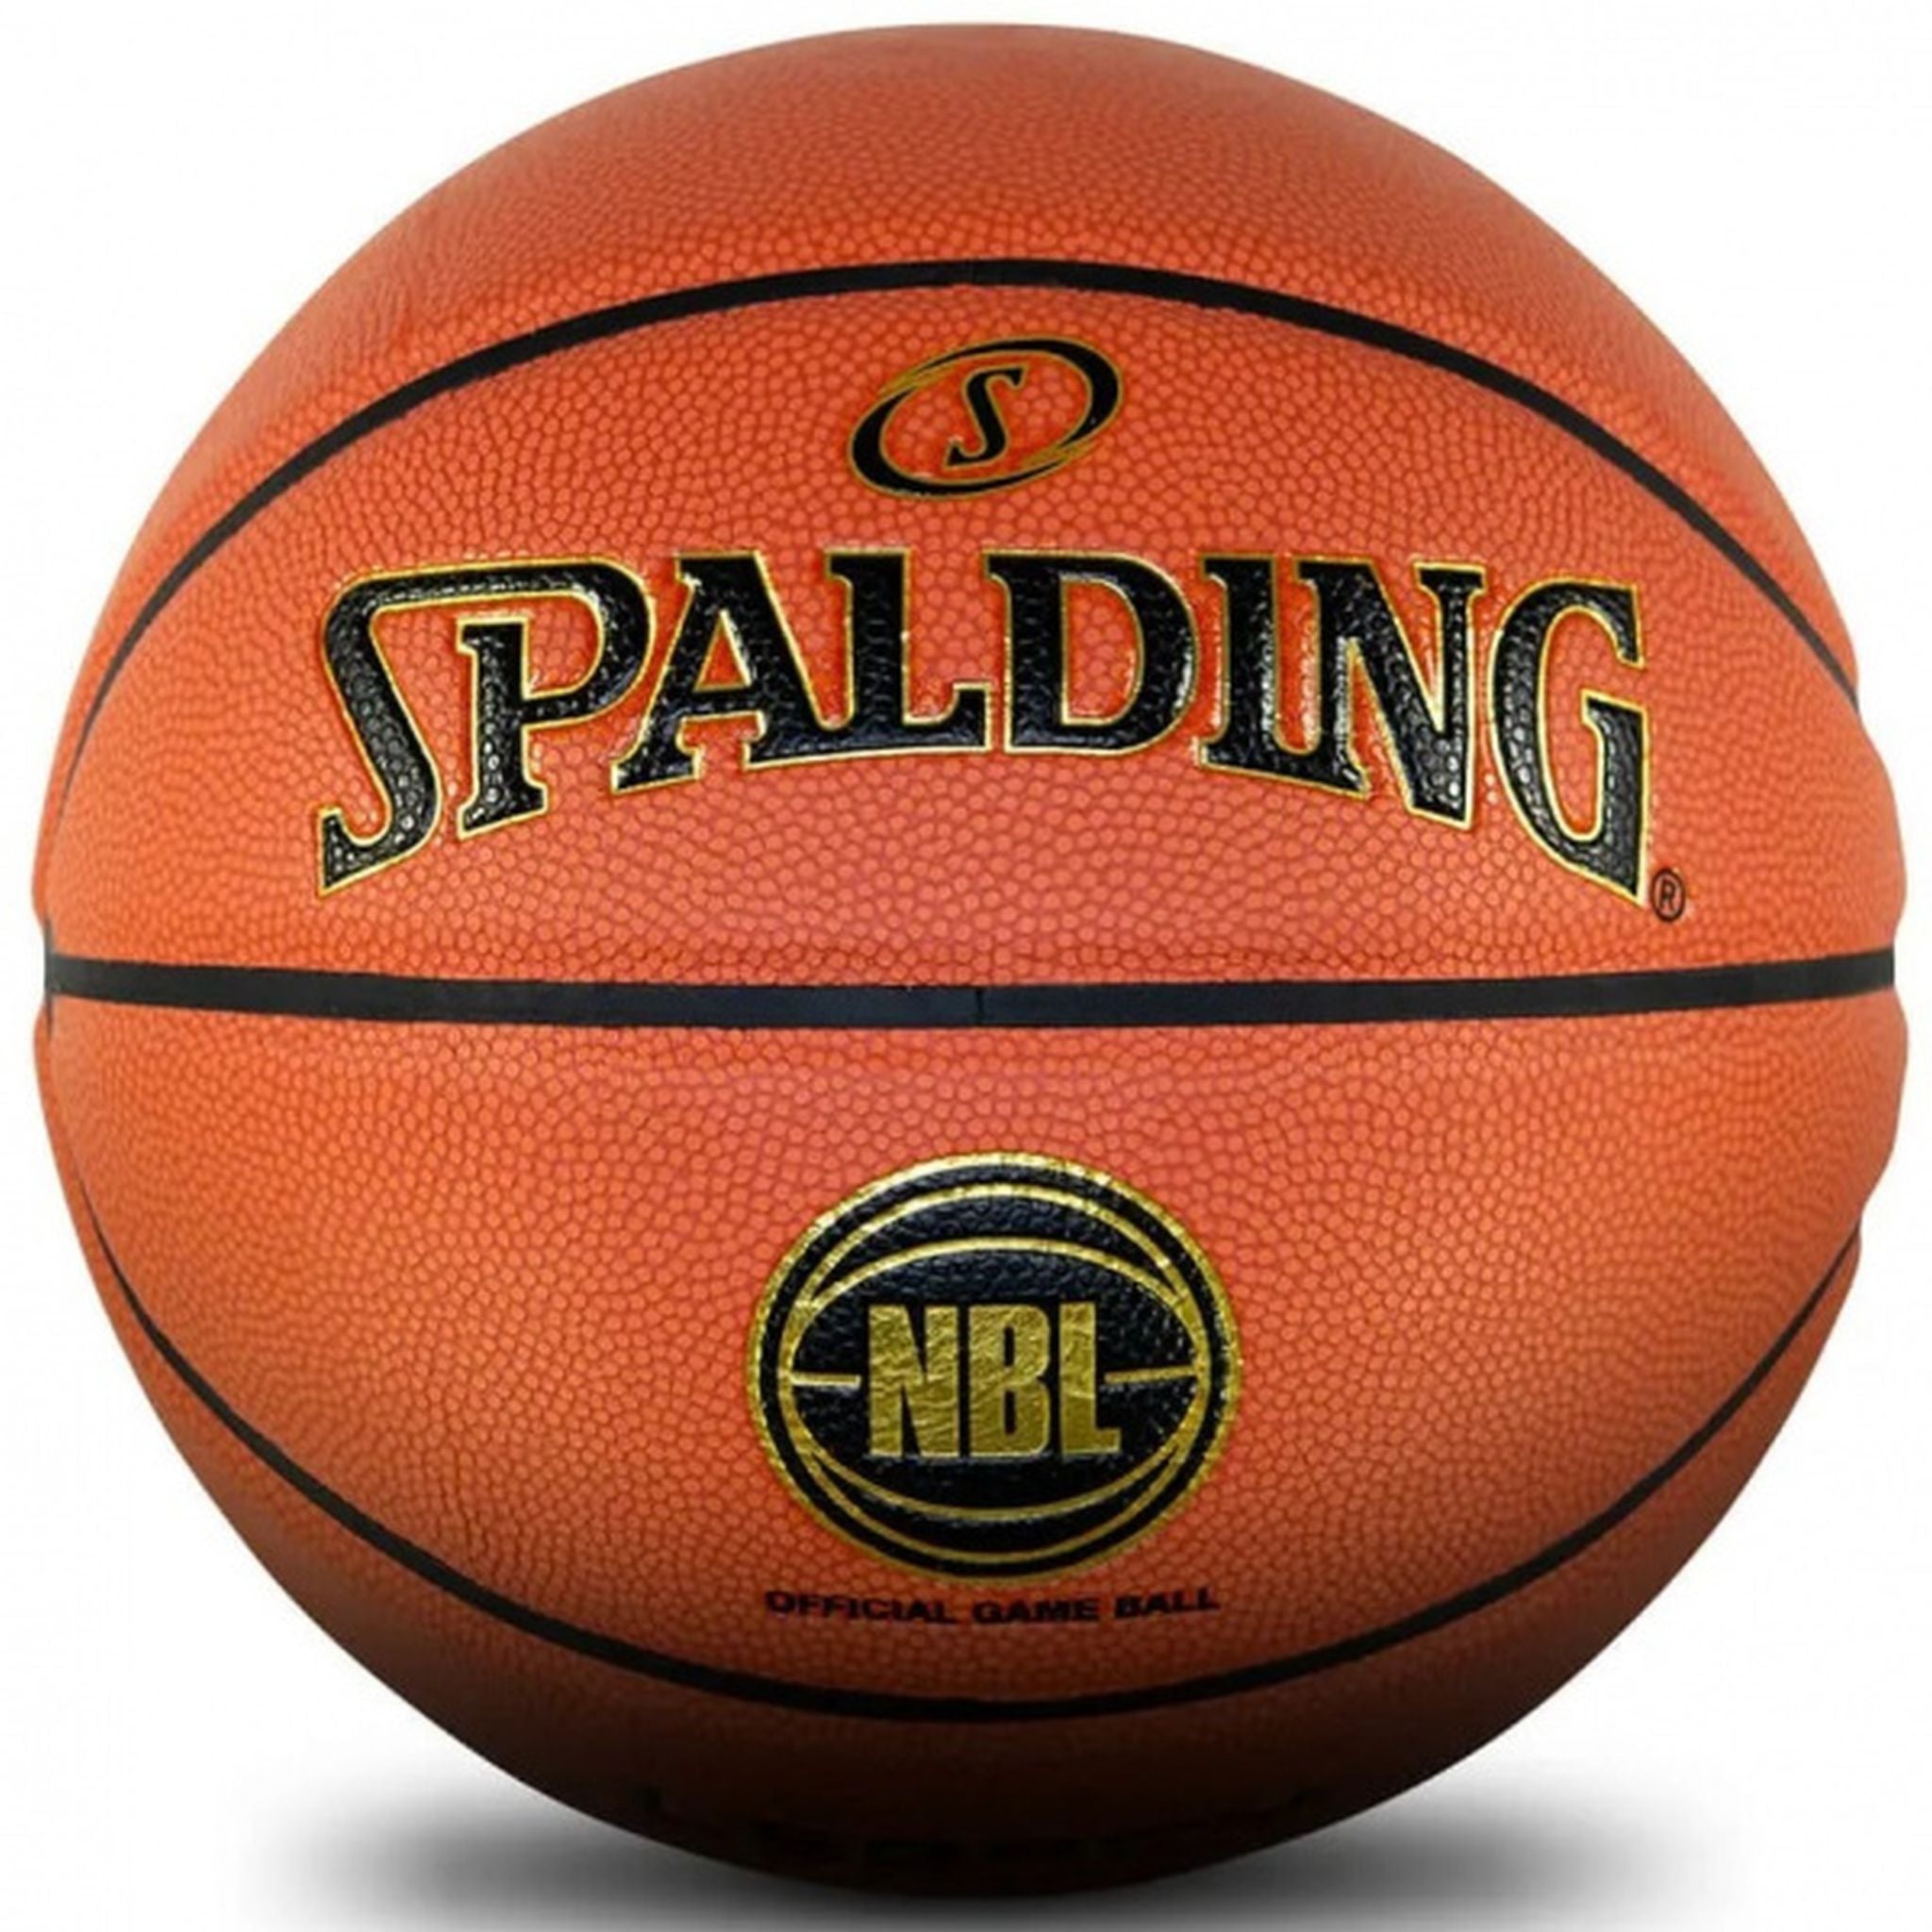 Spalding NBL Official Game Ball